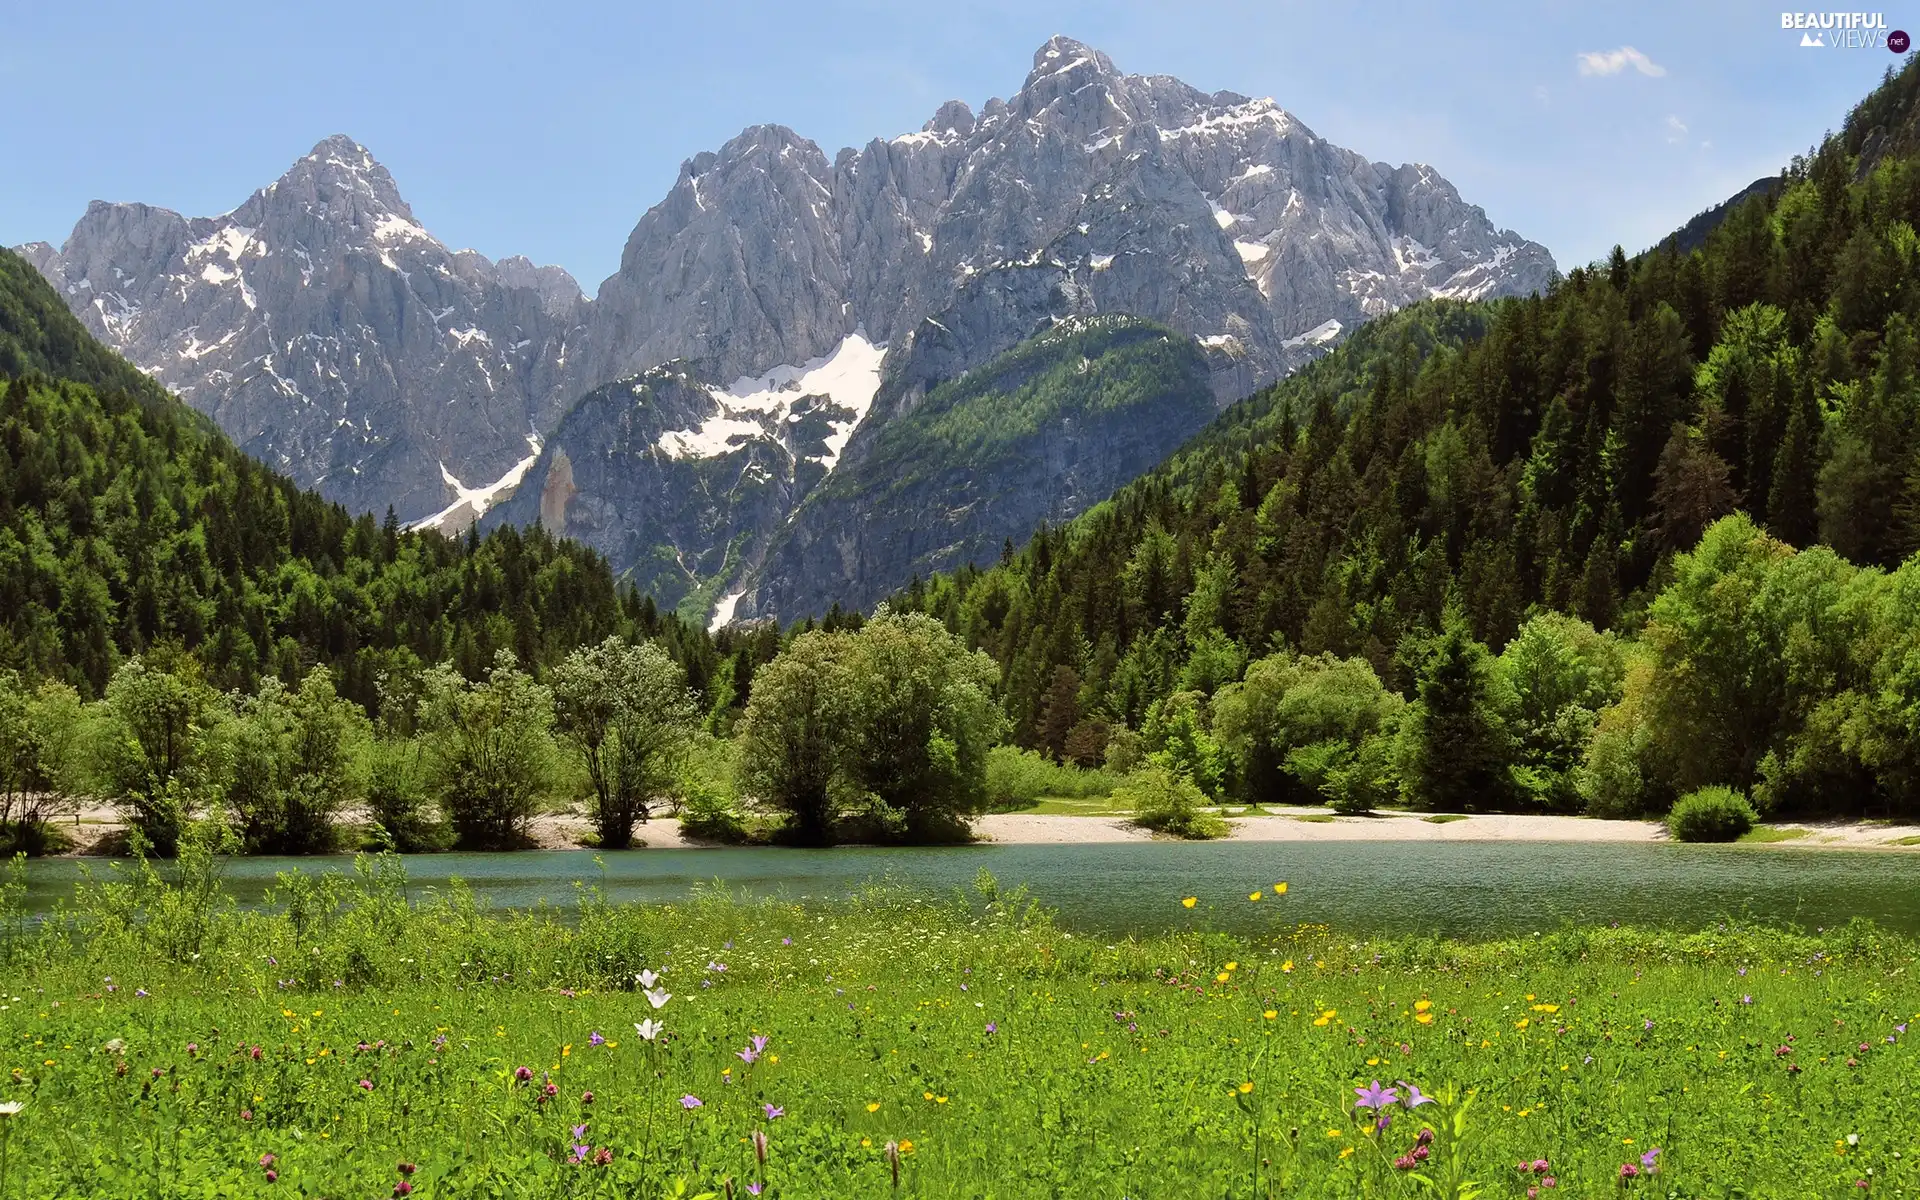 viewes, Mountains, lake, trees, Flowers